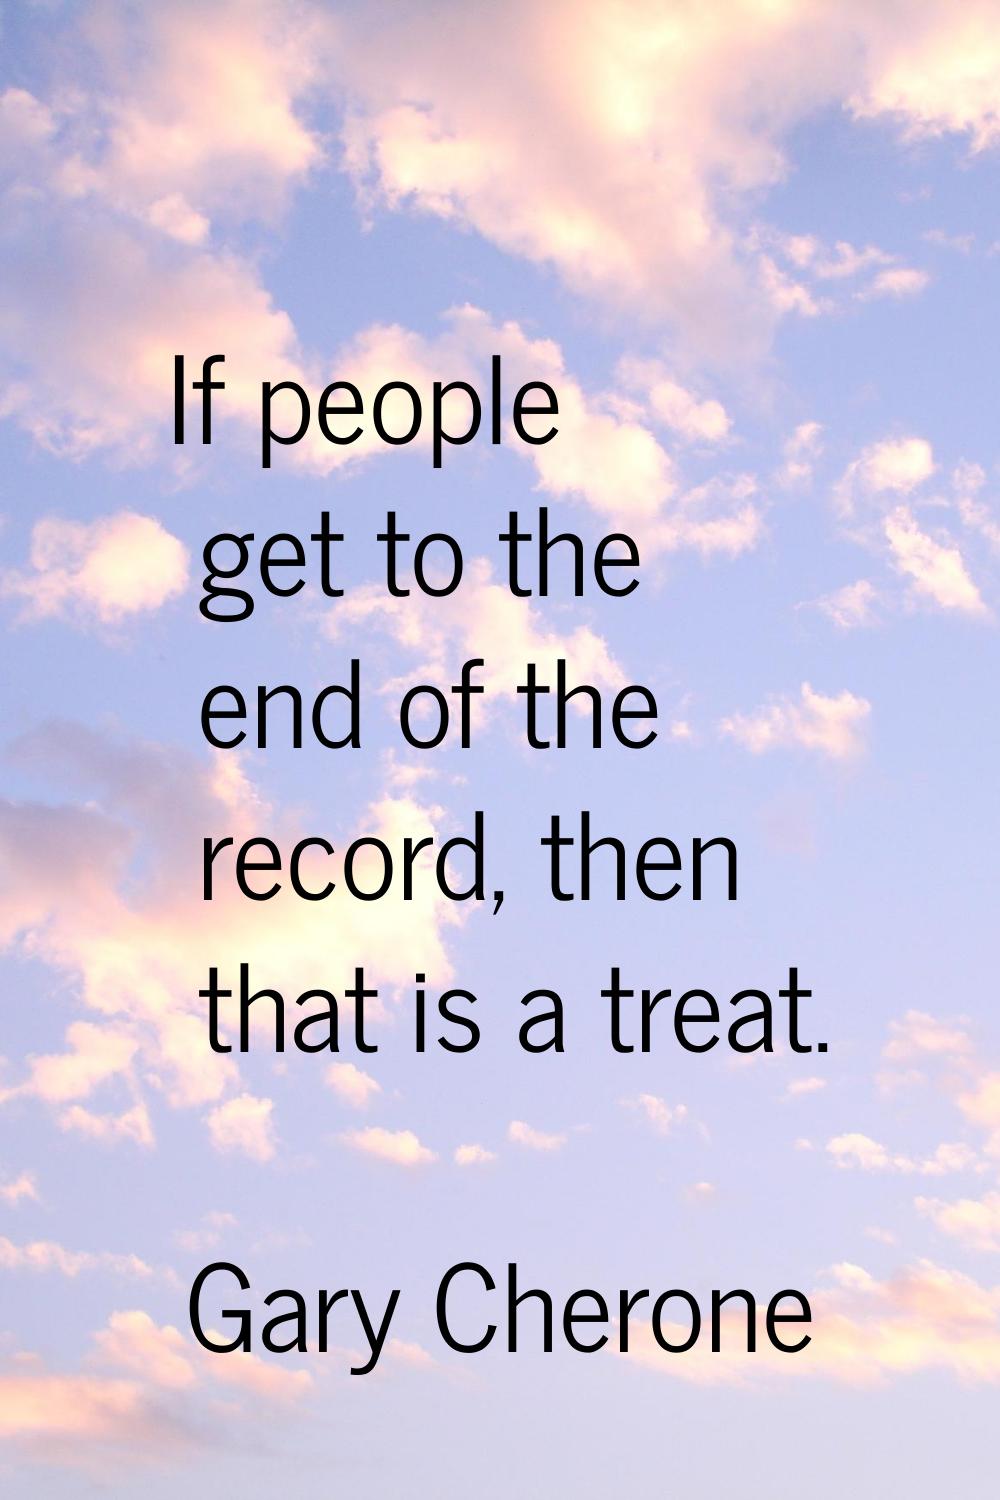 If people get to the end of the record, then that is a treat.